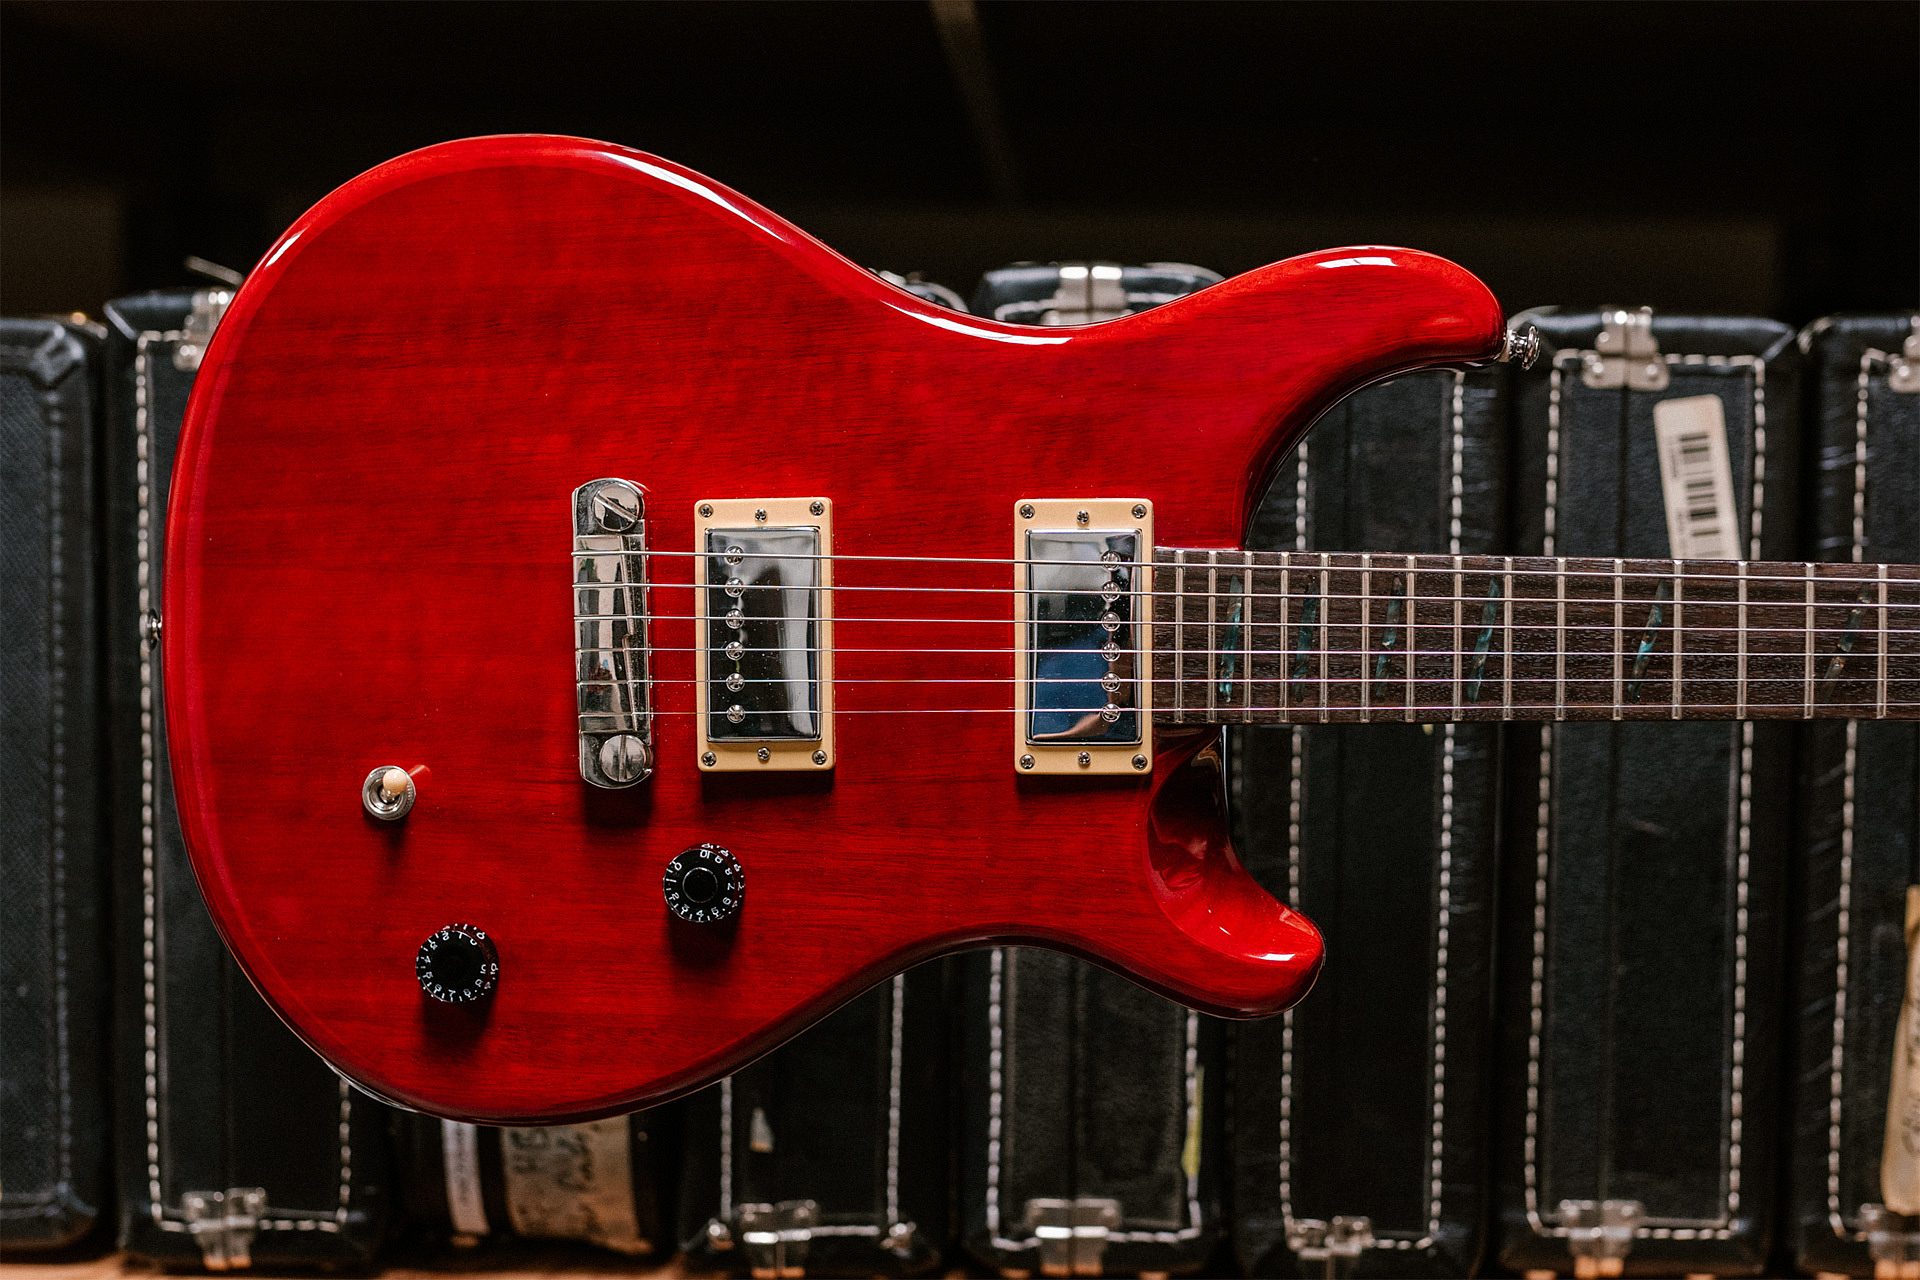 New 'From the Archives' Episode - The First SE Guitar!